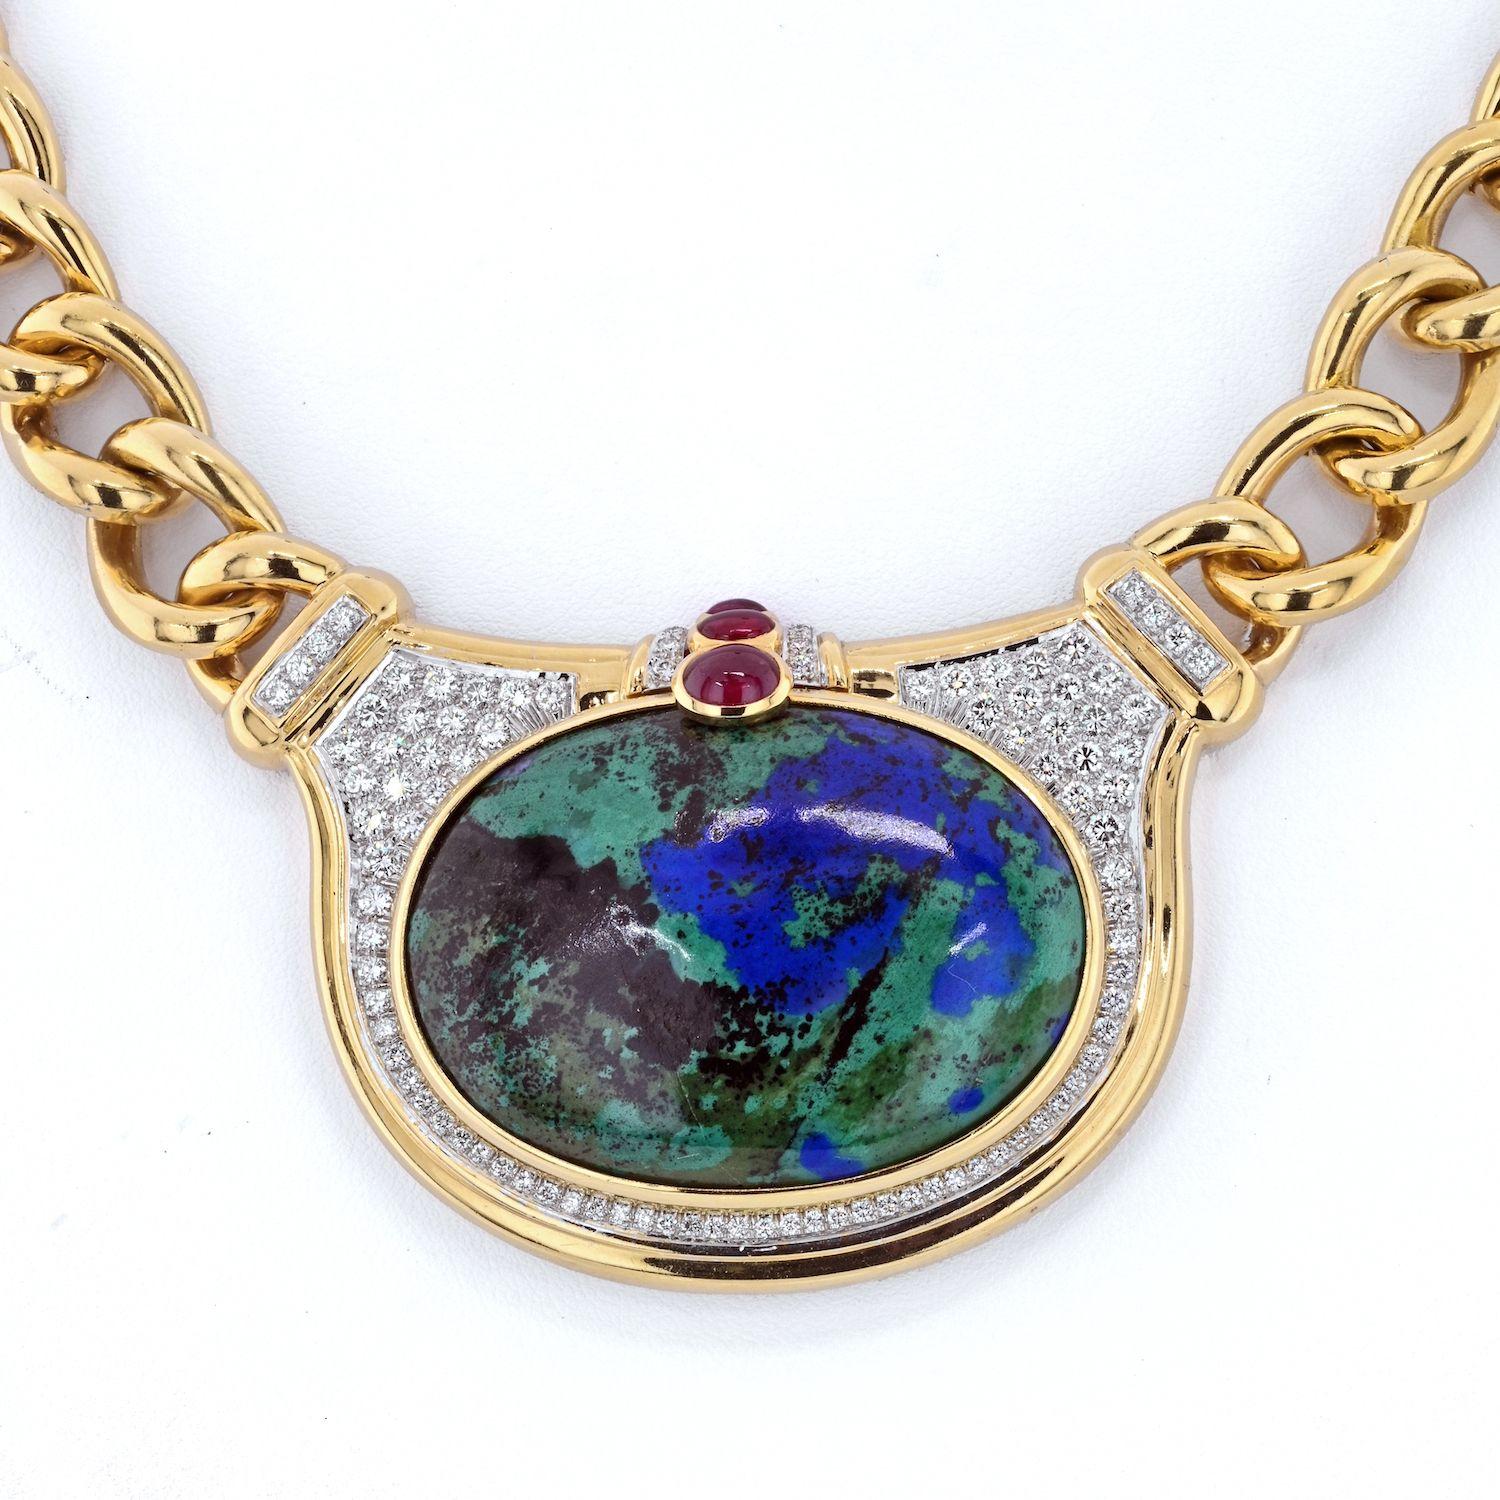 This fabulous necklace is an 18 karat yellow gold, diamond and azurmalachite necklace designed and signed by David Webb. The necklace centers a large smooth oval tablet of high quality azurmalachite further surrounded by approximately 4 cts in round